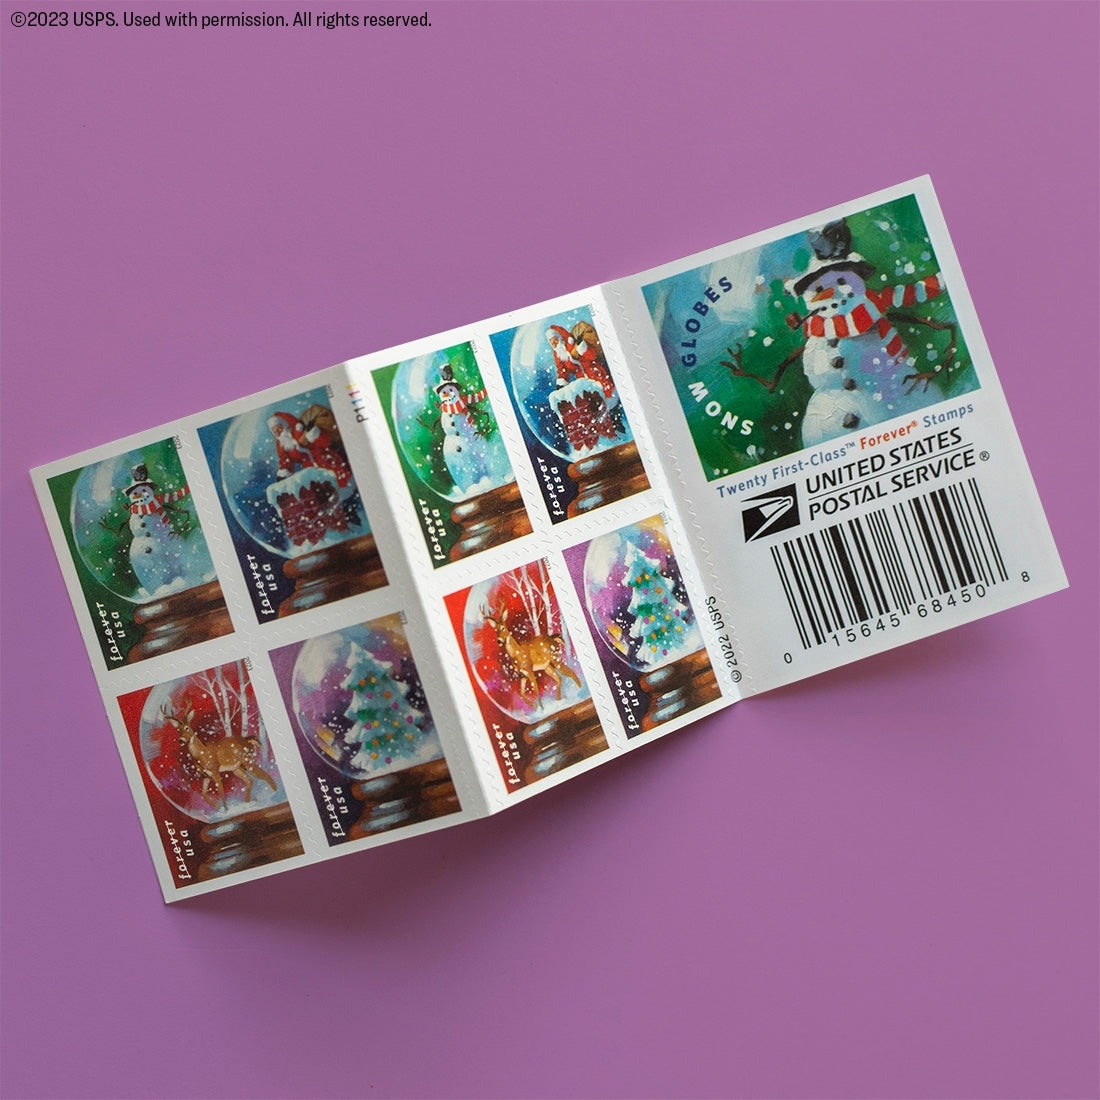 USPS Snow Globes (Booklet of 20) Forever Postage Stamps (A Snowman, Santa  Claus Poised on a Chimney, a Majestic Deer, and a Christmas Tree) 2023  Scott